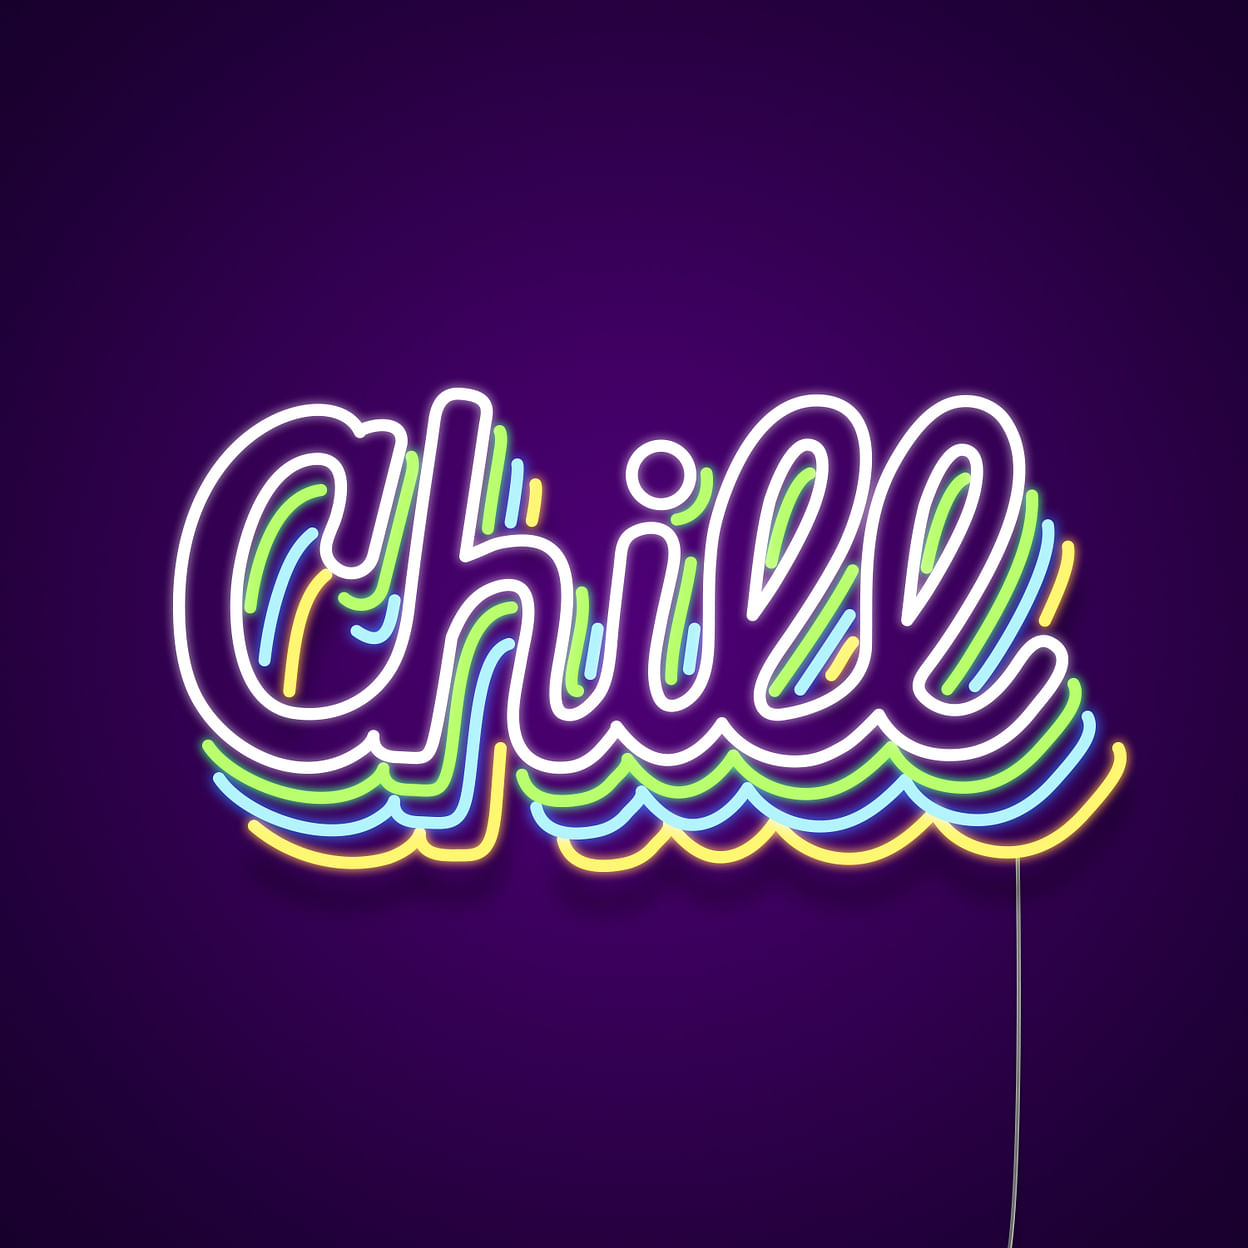 Gæsterne dans Stol Chill Neon Light Sign | Cool Neon Light Signs | Neonize